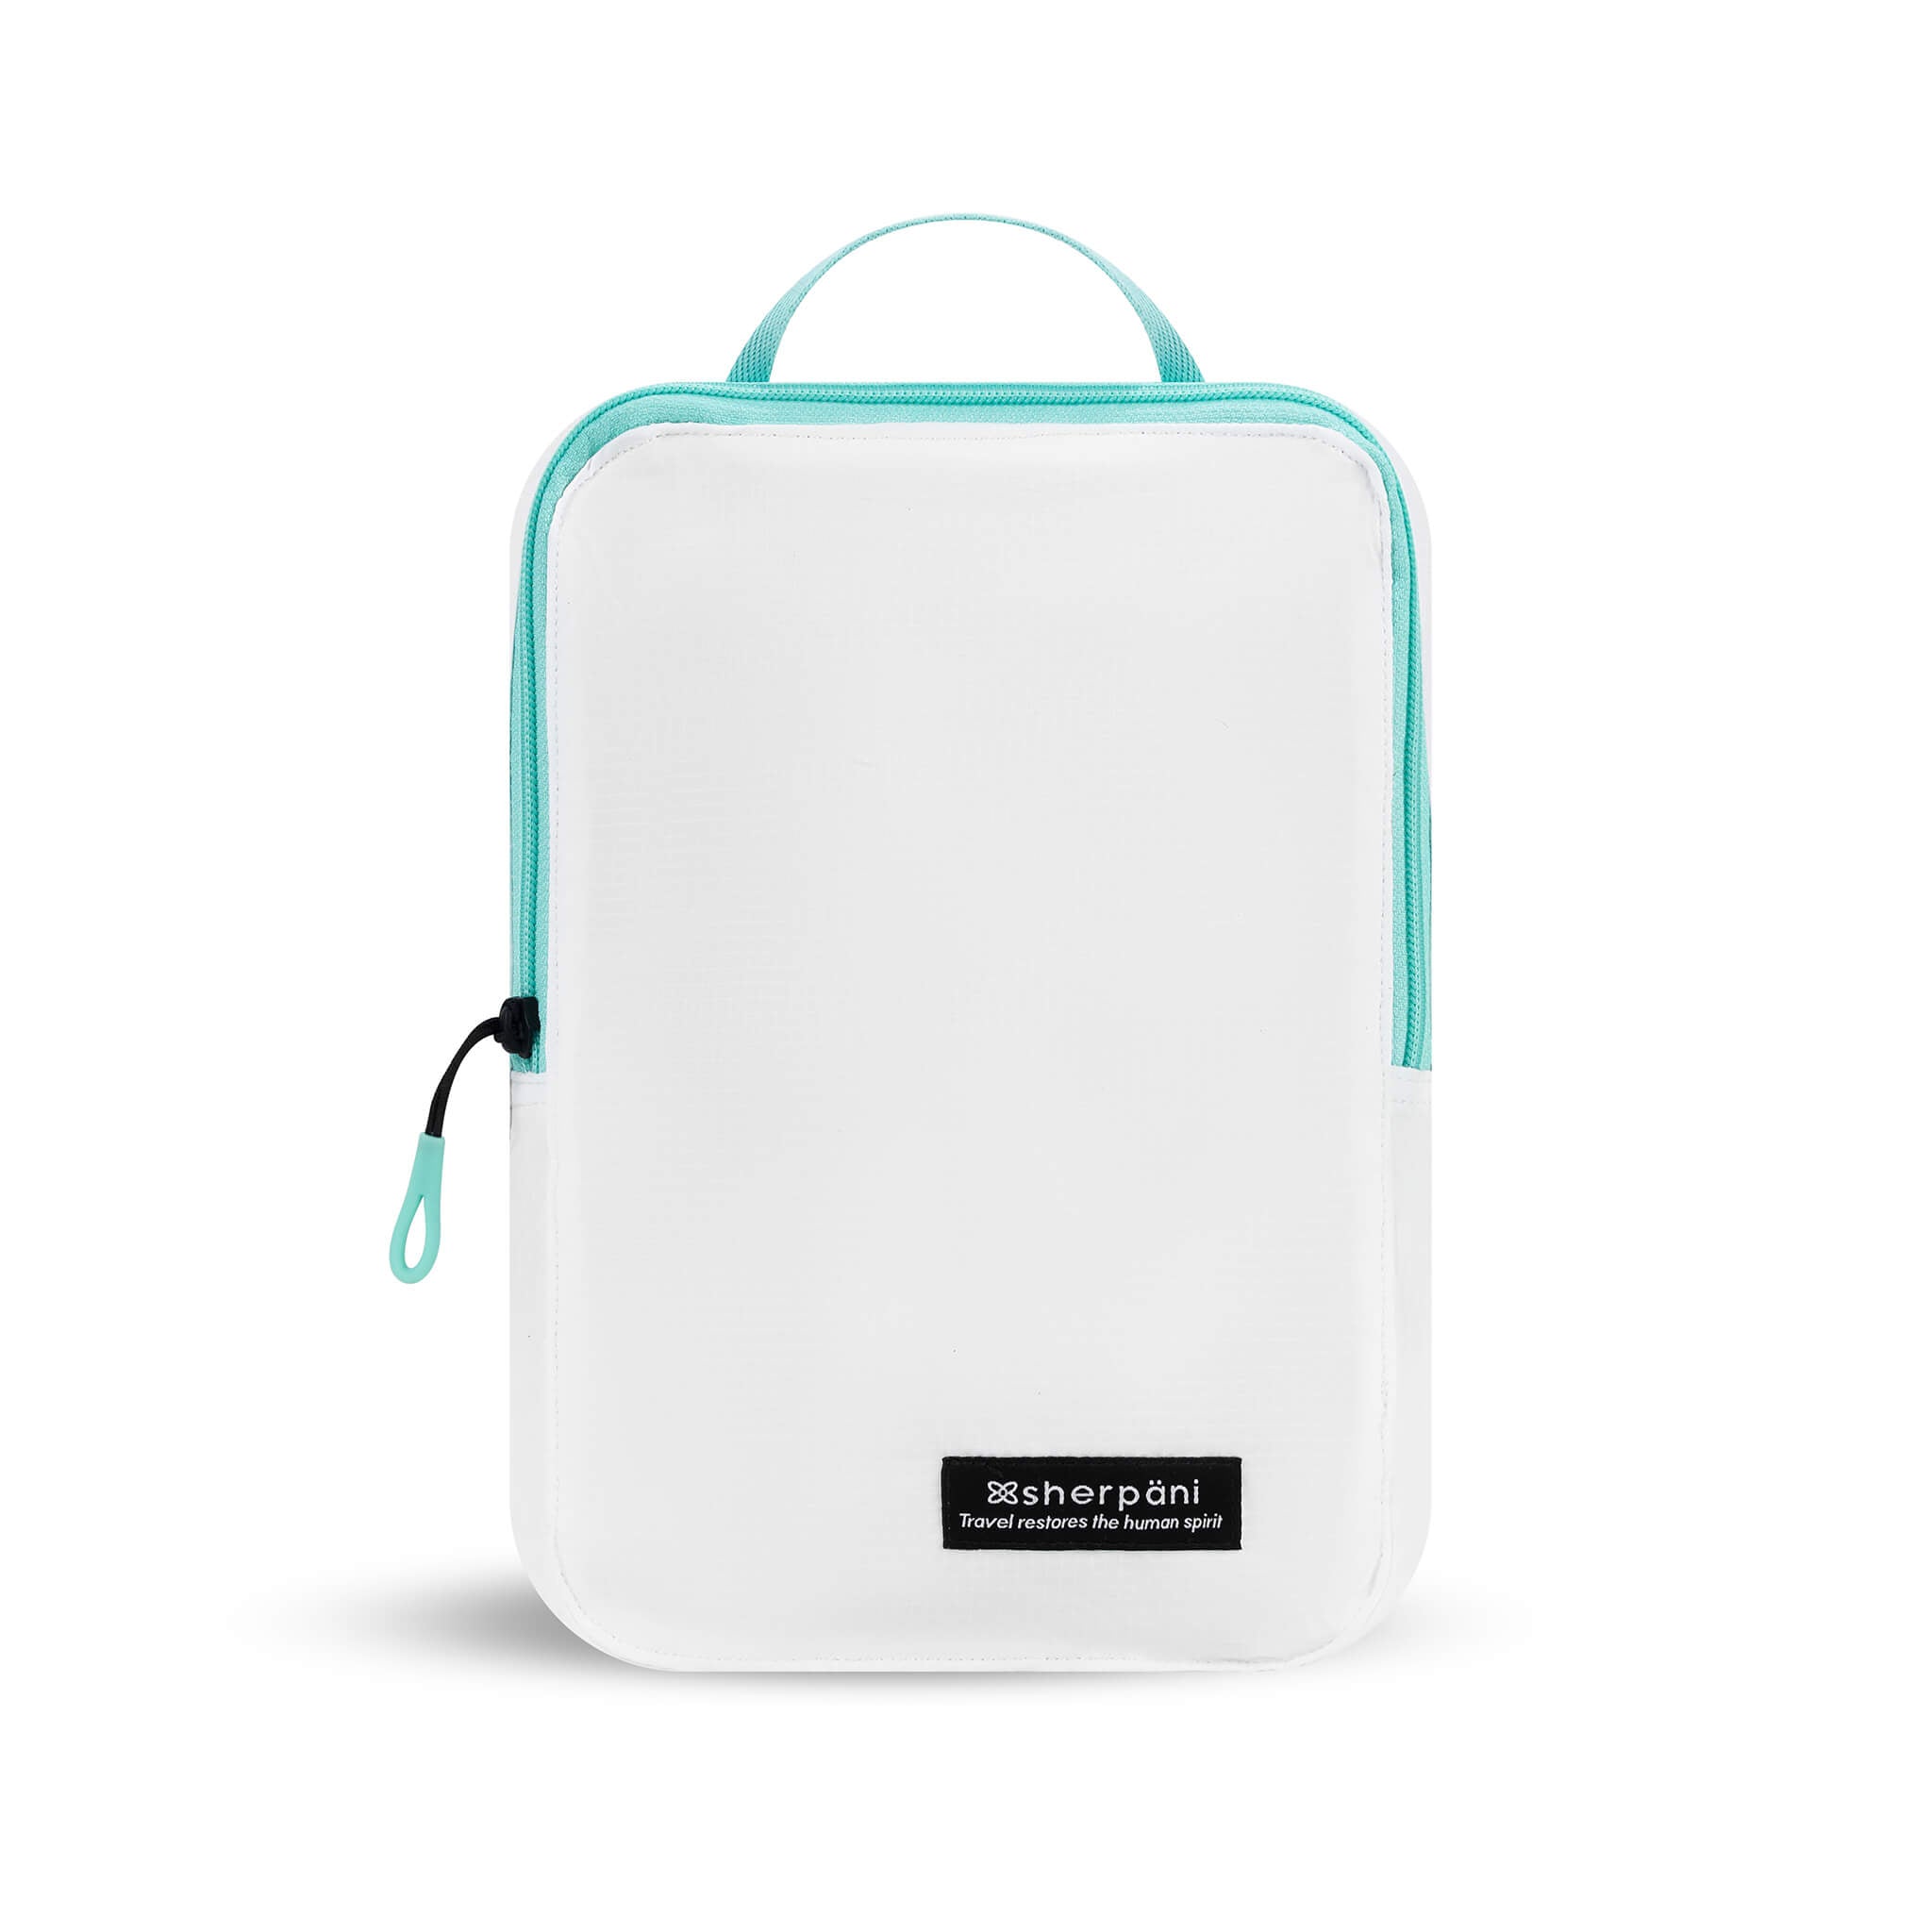 Flat front view of Compass Packing Cube in large size. The cube is white with zipper and handle accented in aqua. 